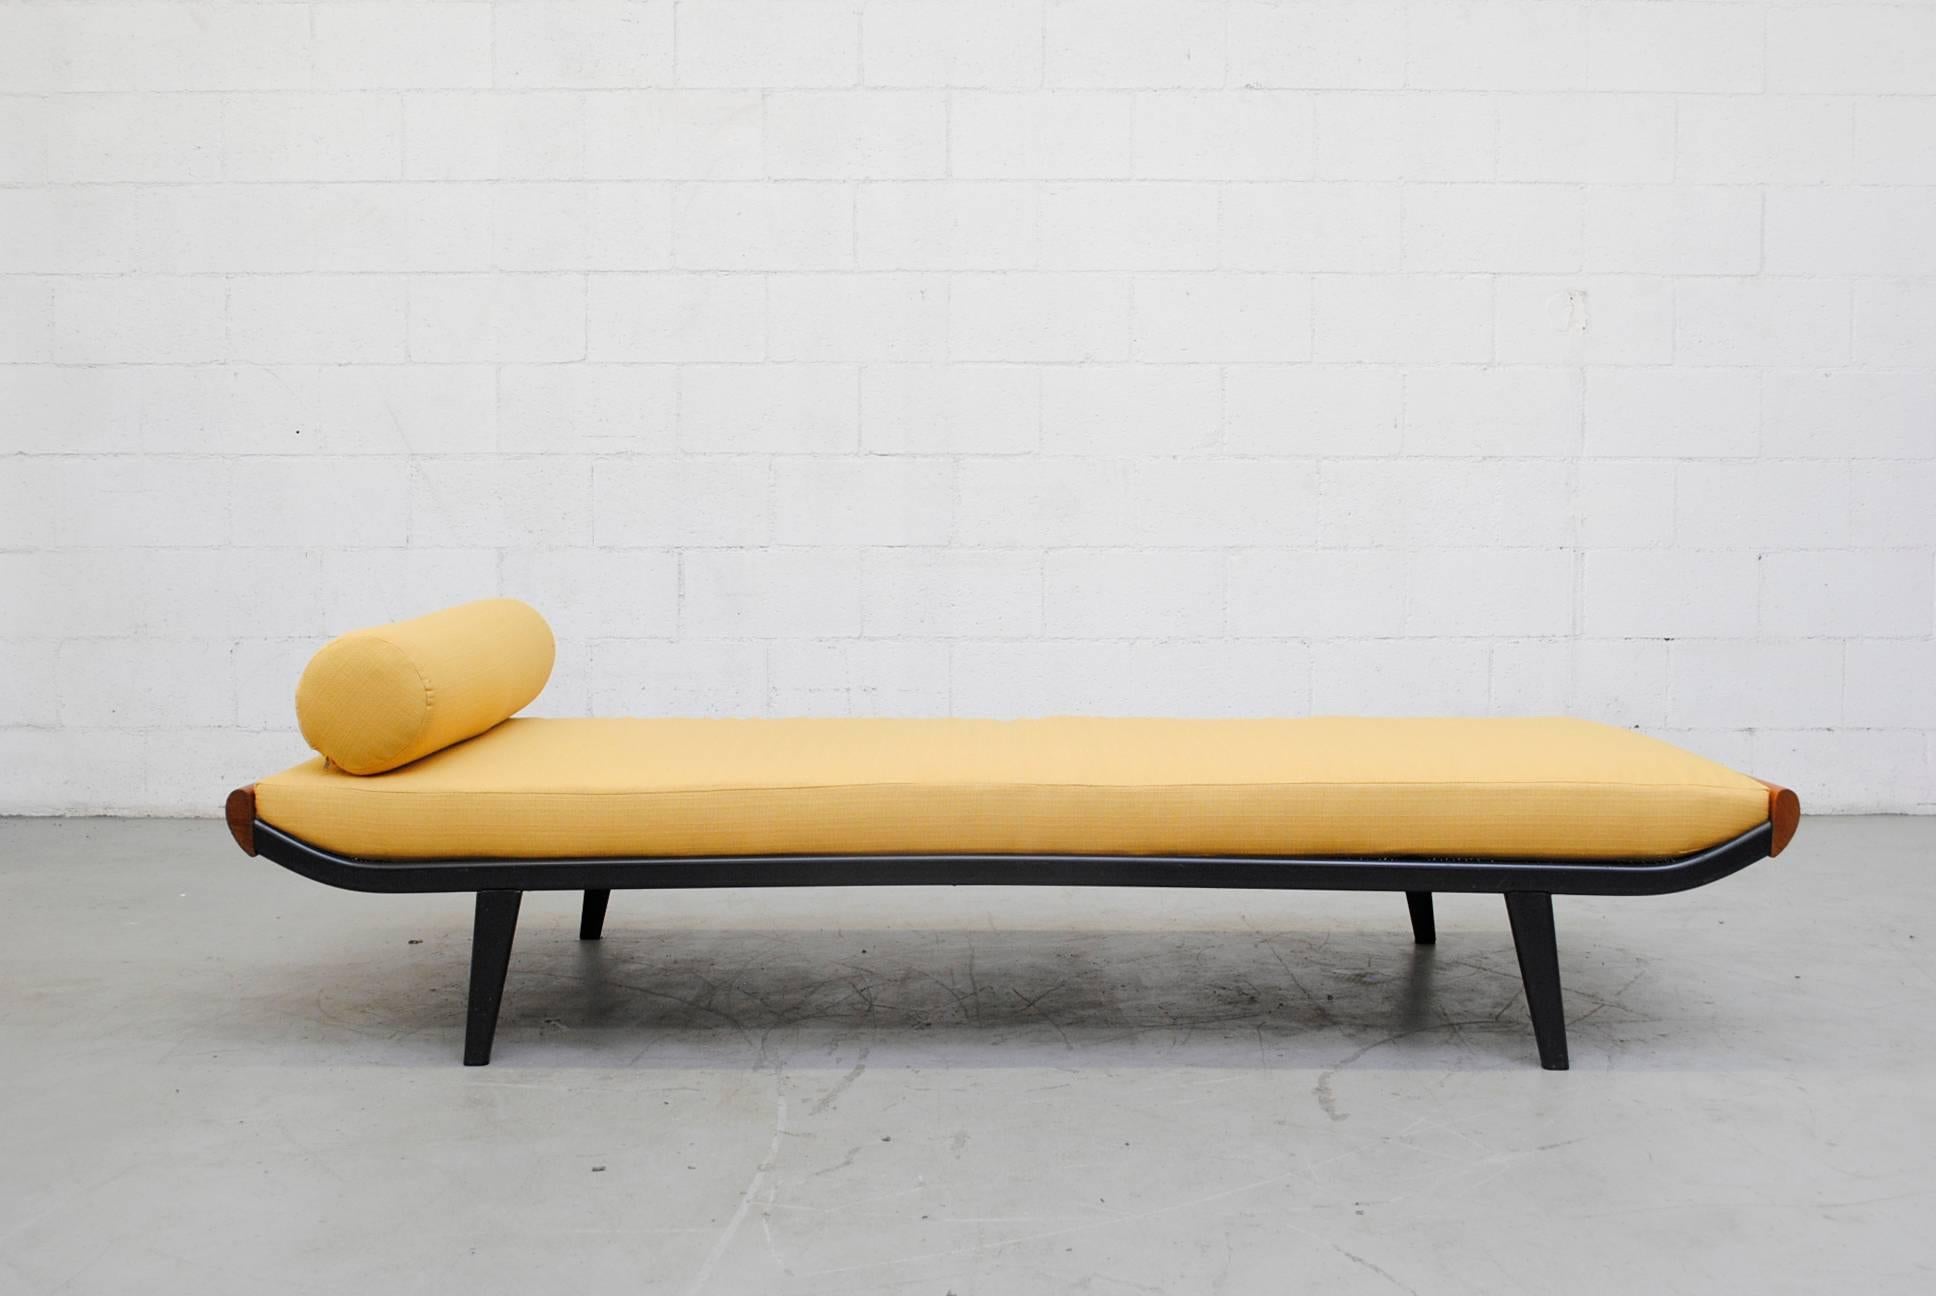 1960s Cleopatra daybed by A.R. Cordemeyer. Wood ends with enameled dark grey metal frame and Auping printed on mesh springs. New yellow upholstered mattress and matching bolster. Frame in original condition with visible scratching to the enameled